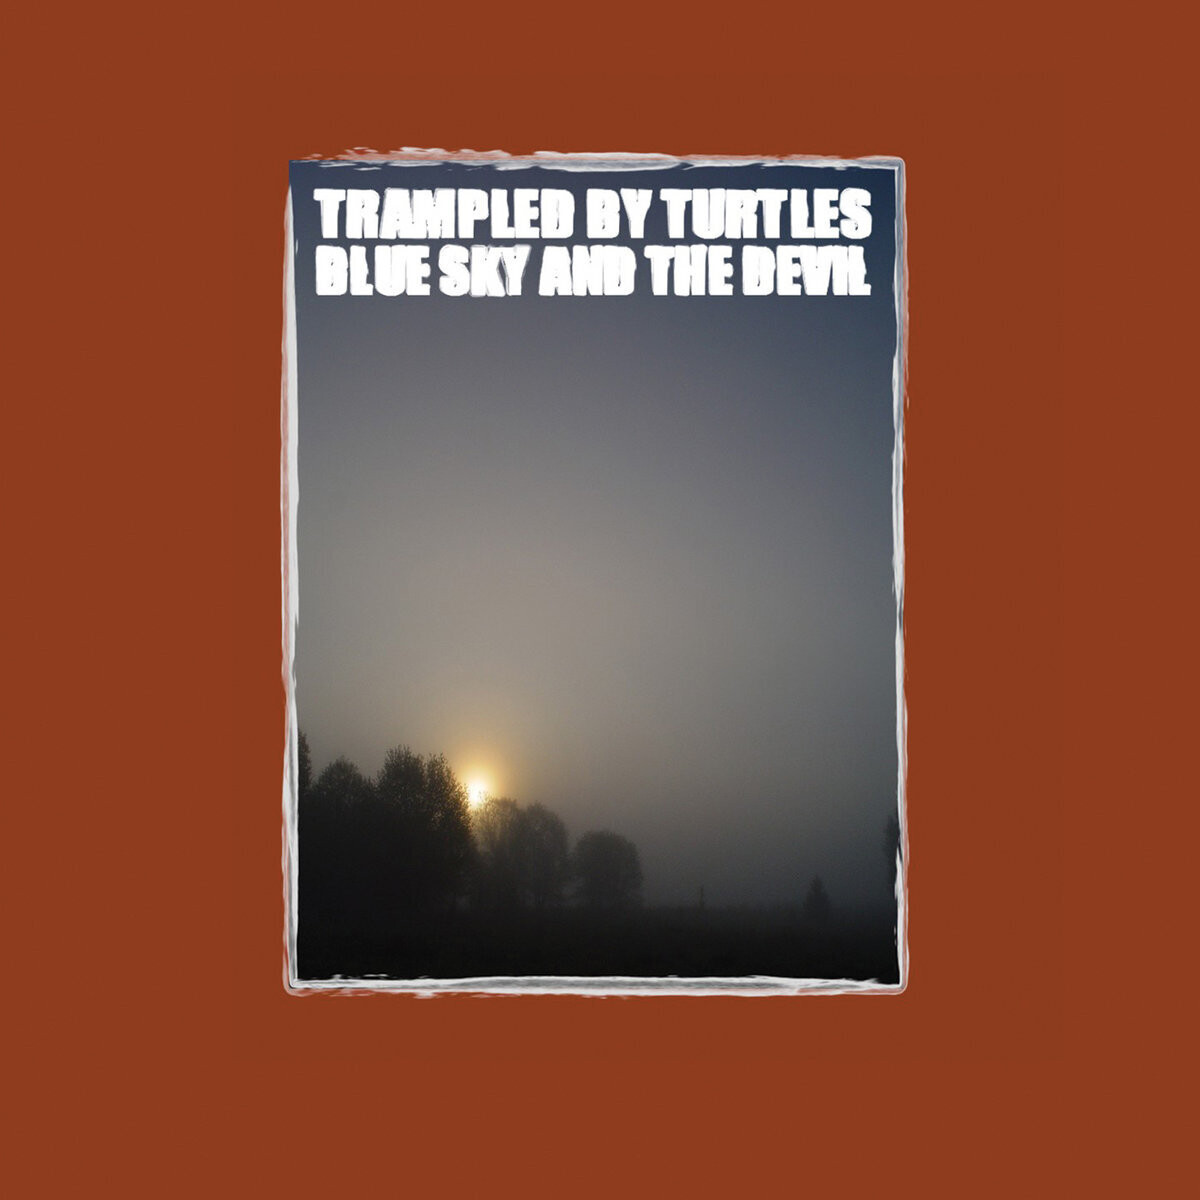 Trampled By Turtles Blue Sky And Devil LP